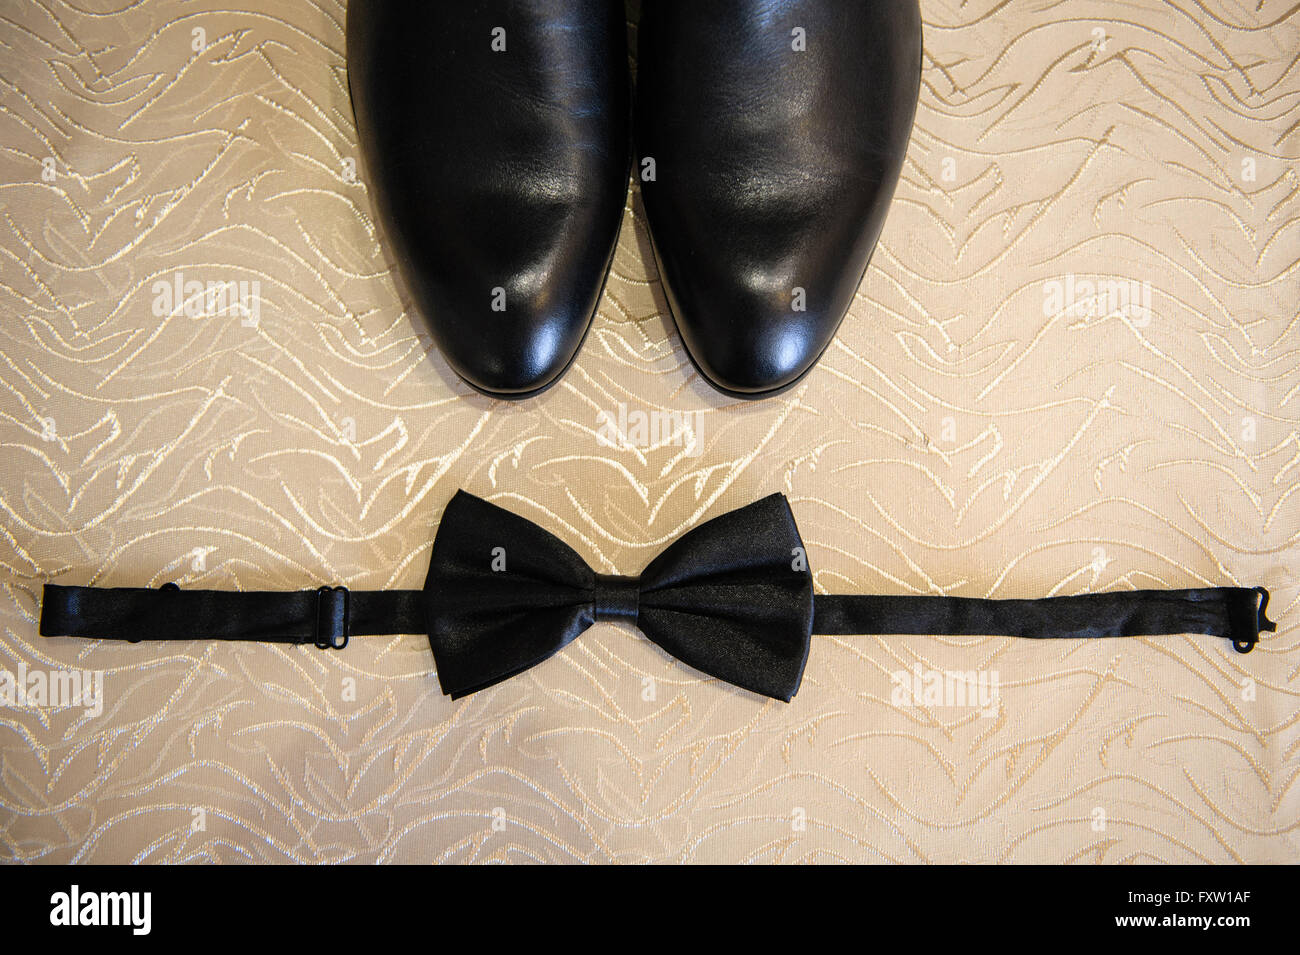 Shoes and bow tie lying on the wooden floor Stock Photo